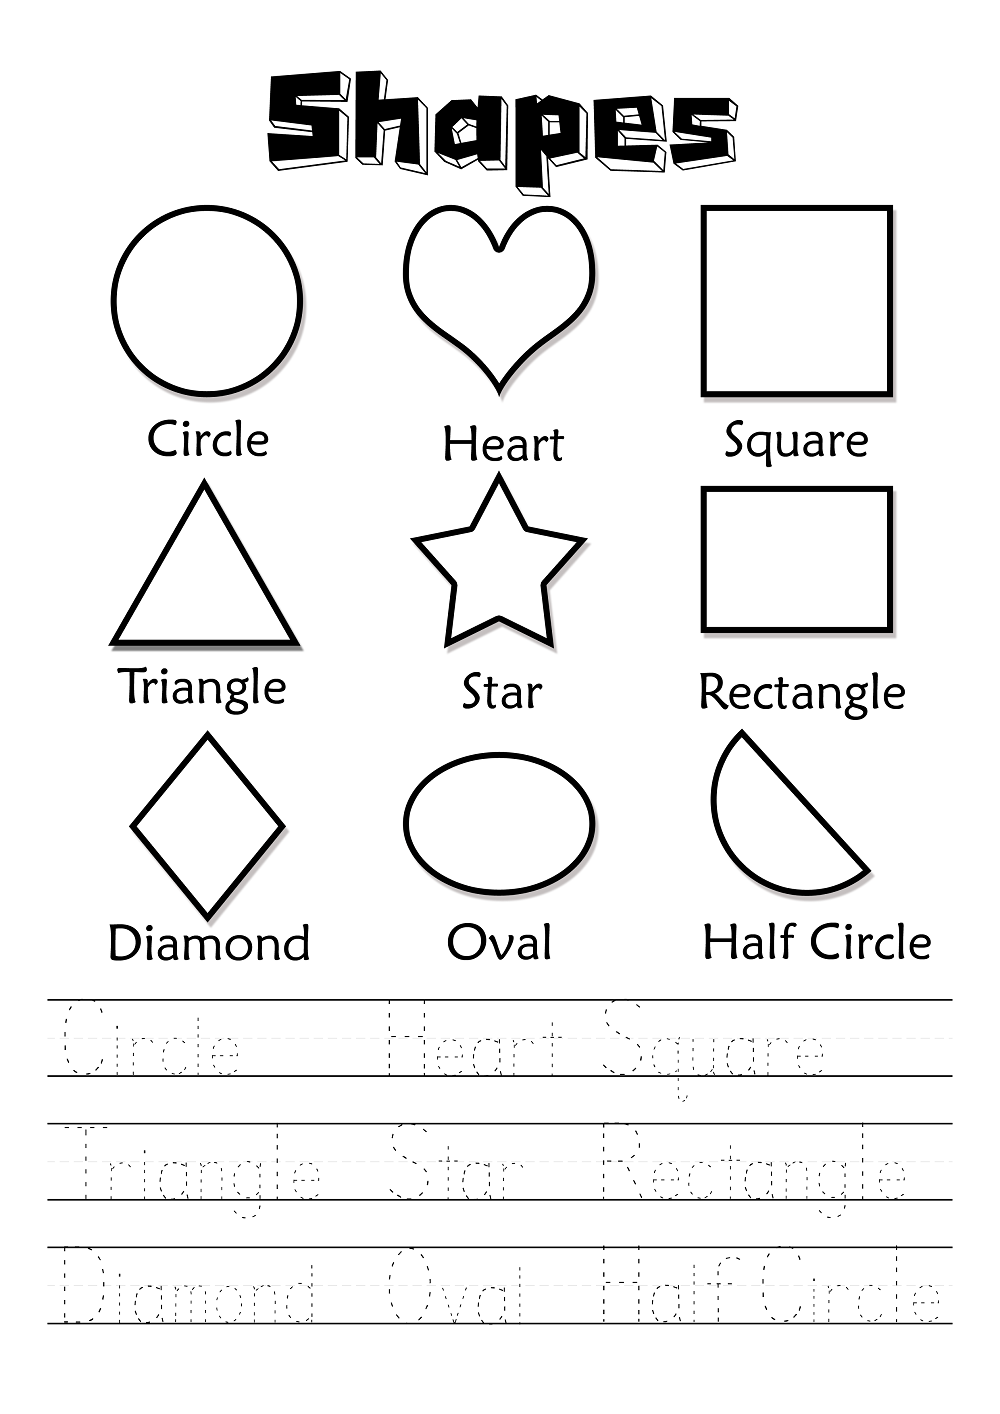 english-worksheets-for-children-with-vocabulary-test-learning-printable